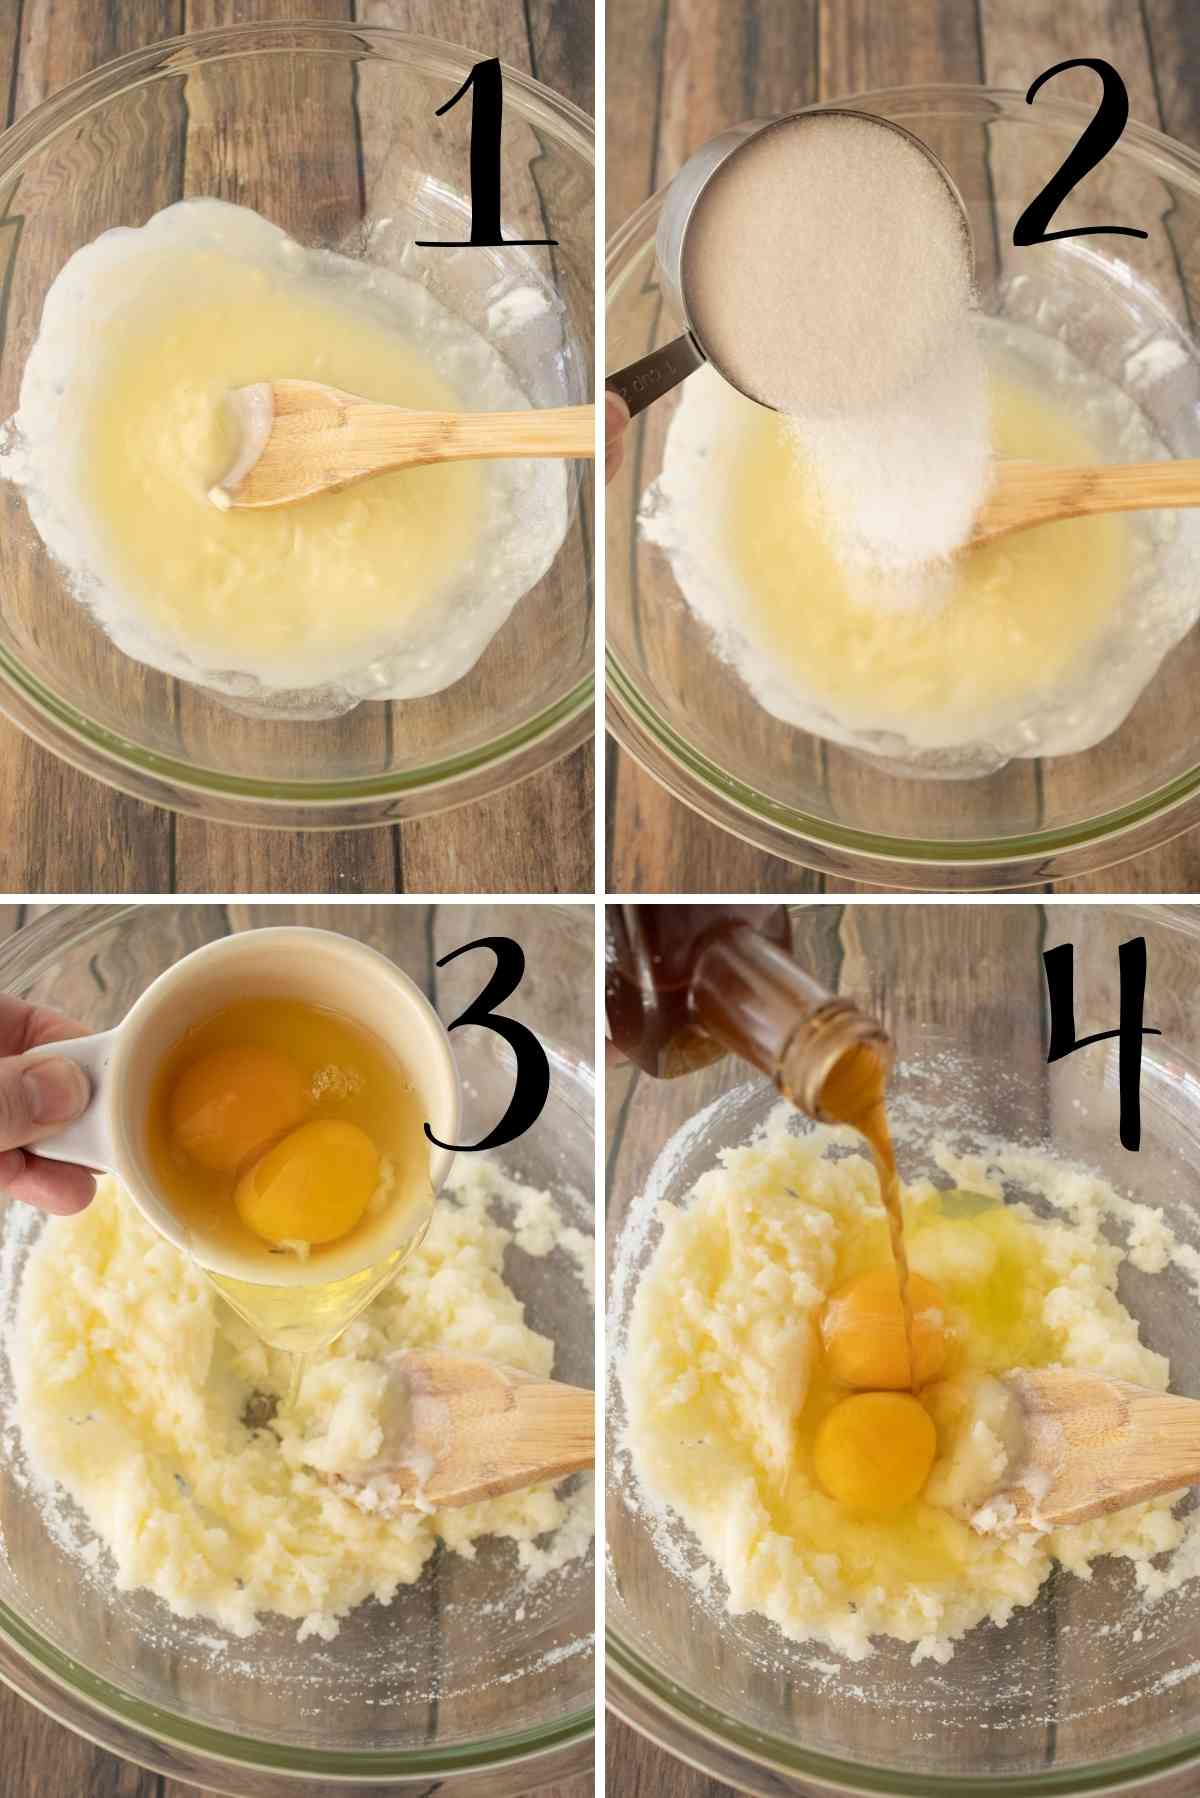 Mix together melted butter, sugar, egg and vanilla in a mixing bowl.